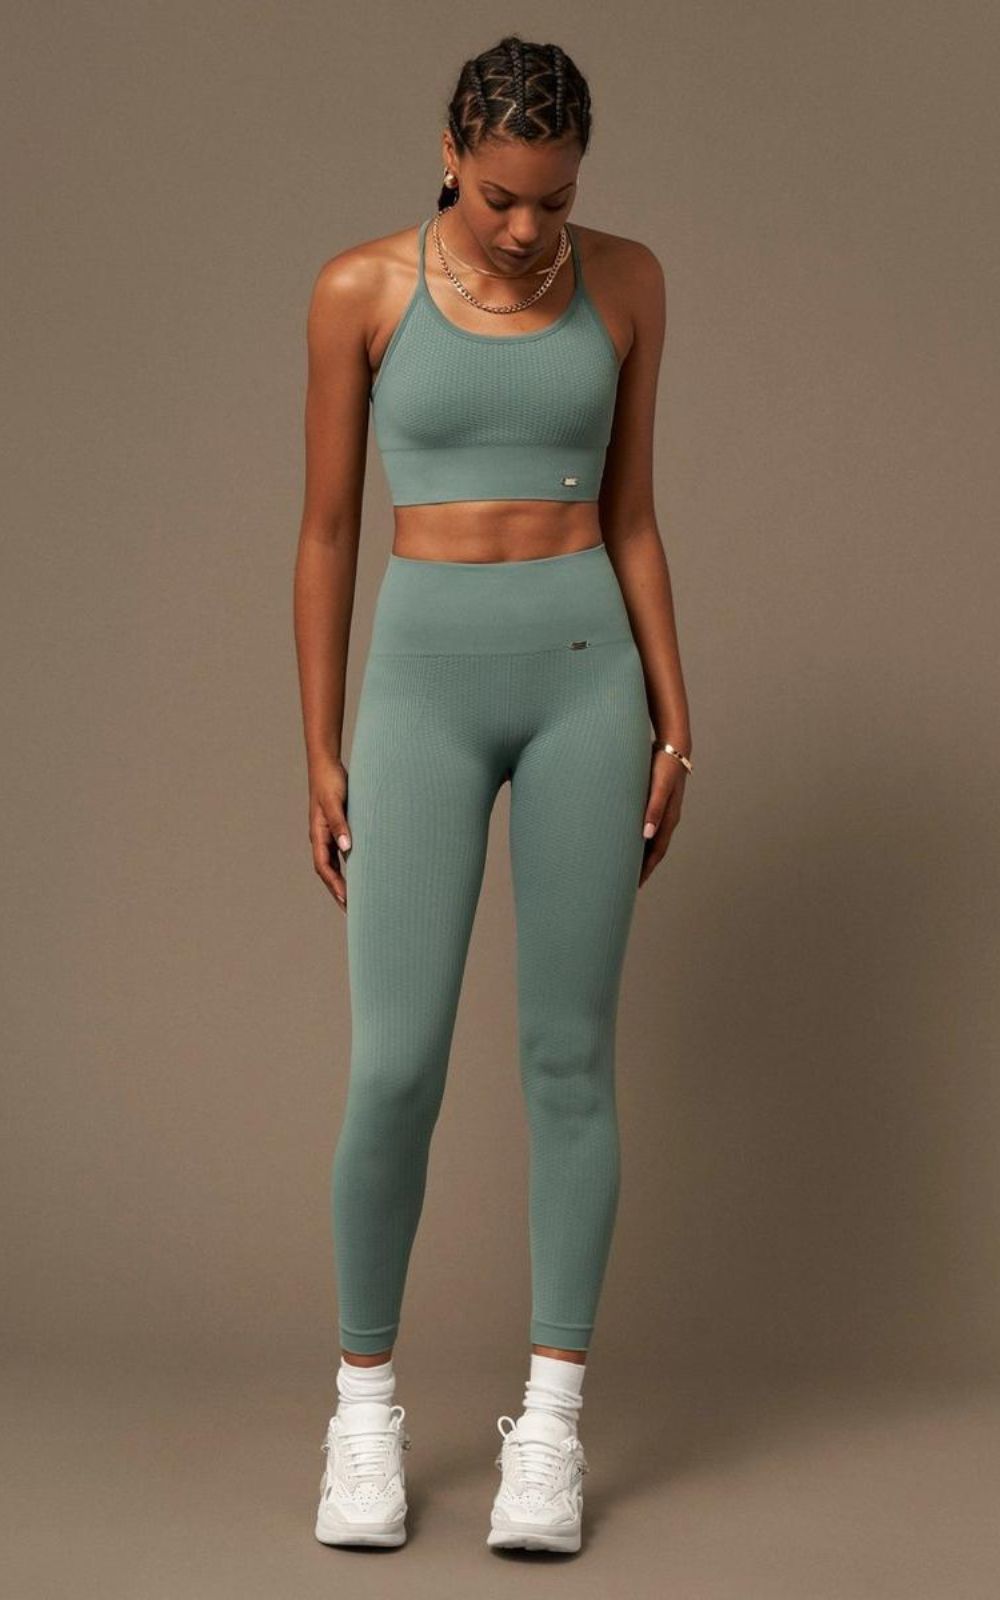 Flow Legging 4.0: Sustainable Second Skin Legging in Stormy Sea Blue